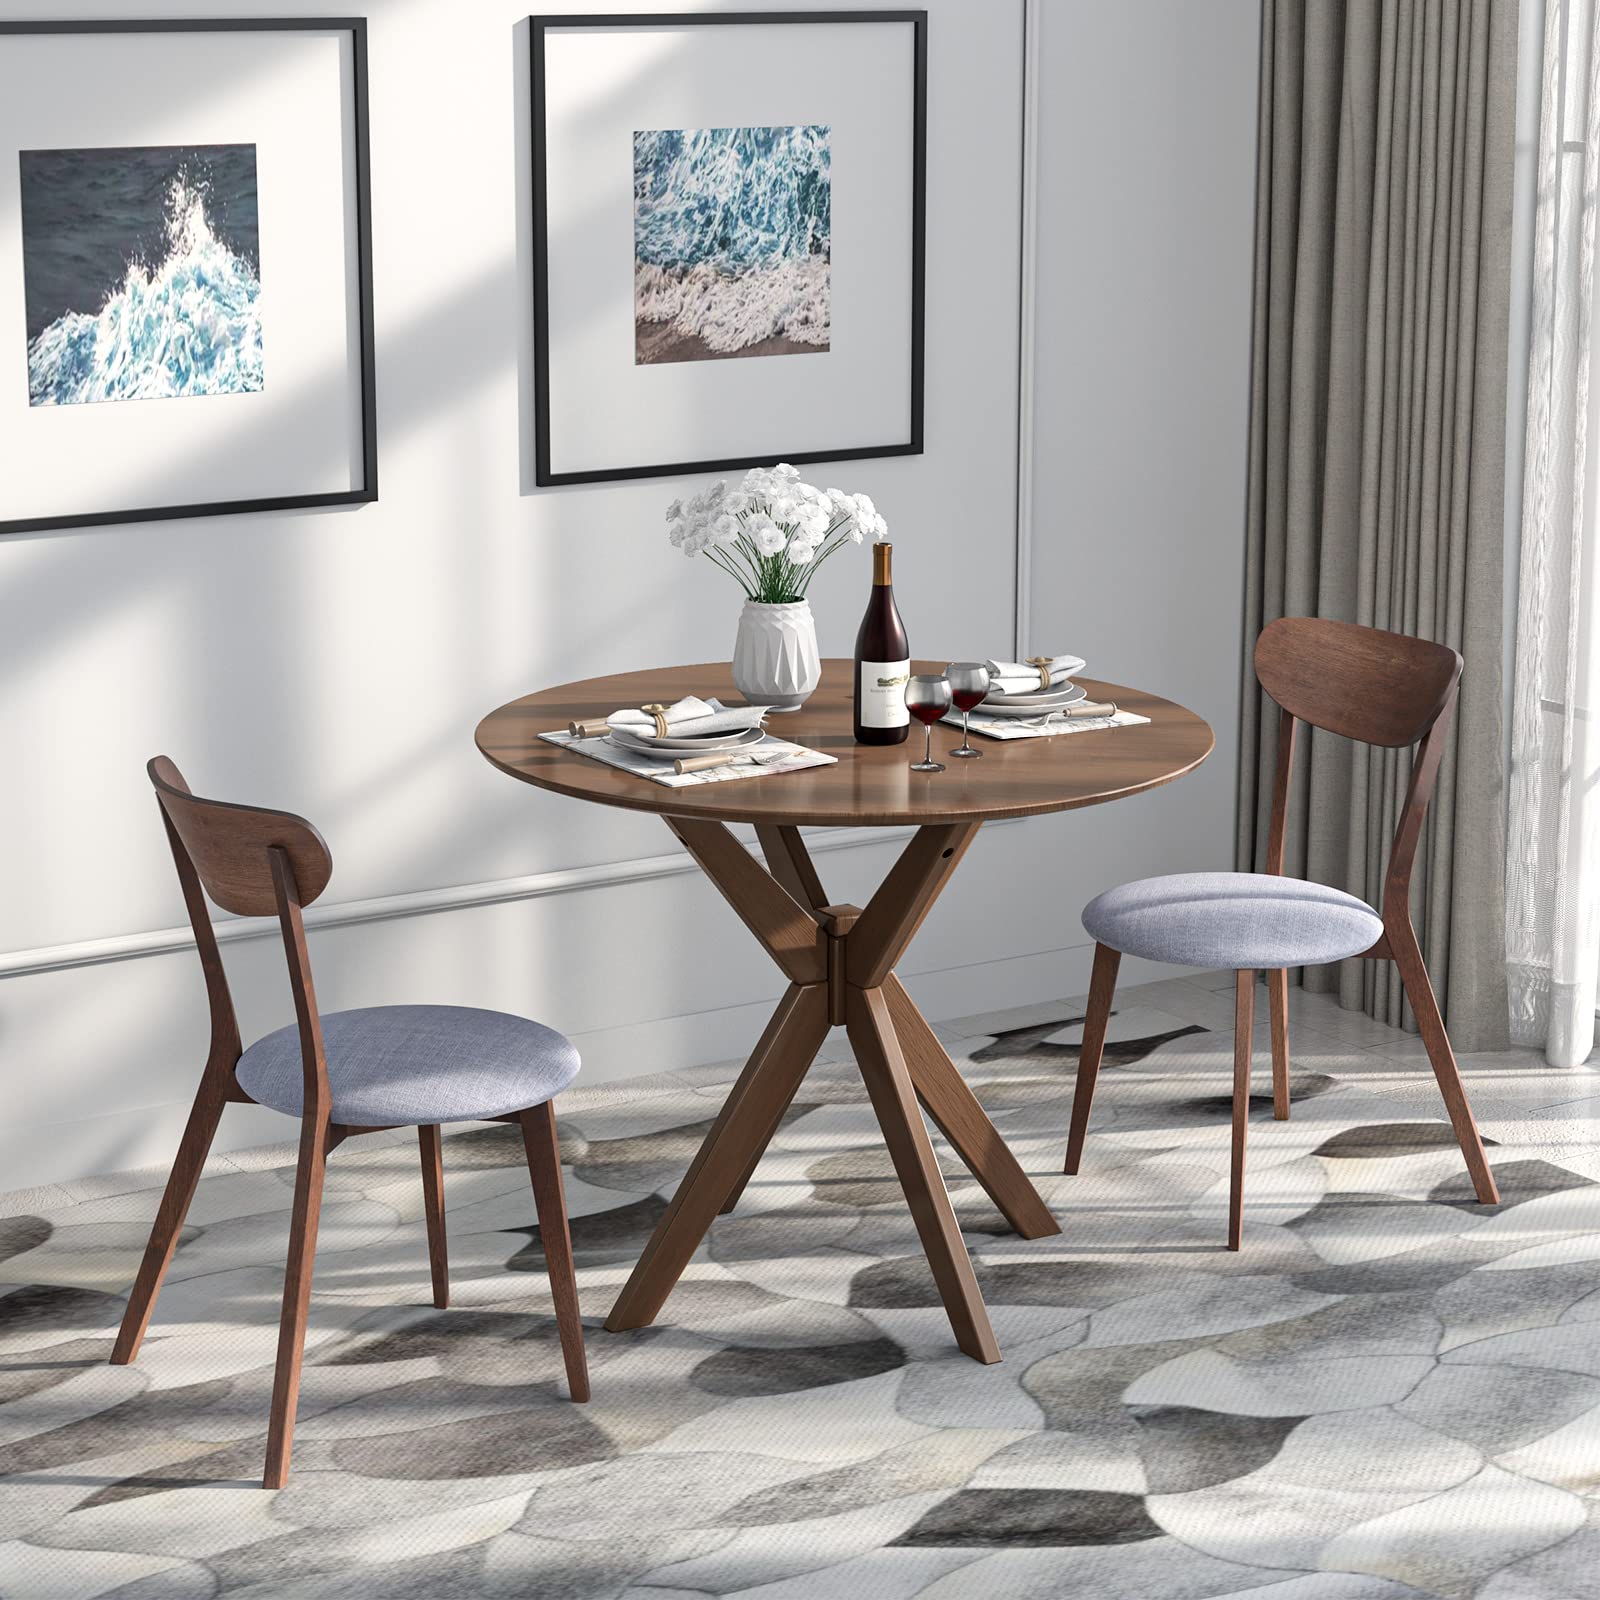 3 Piece Dining Table and Chair Set - Giantex